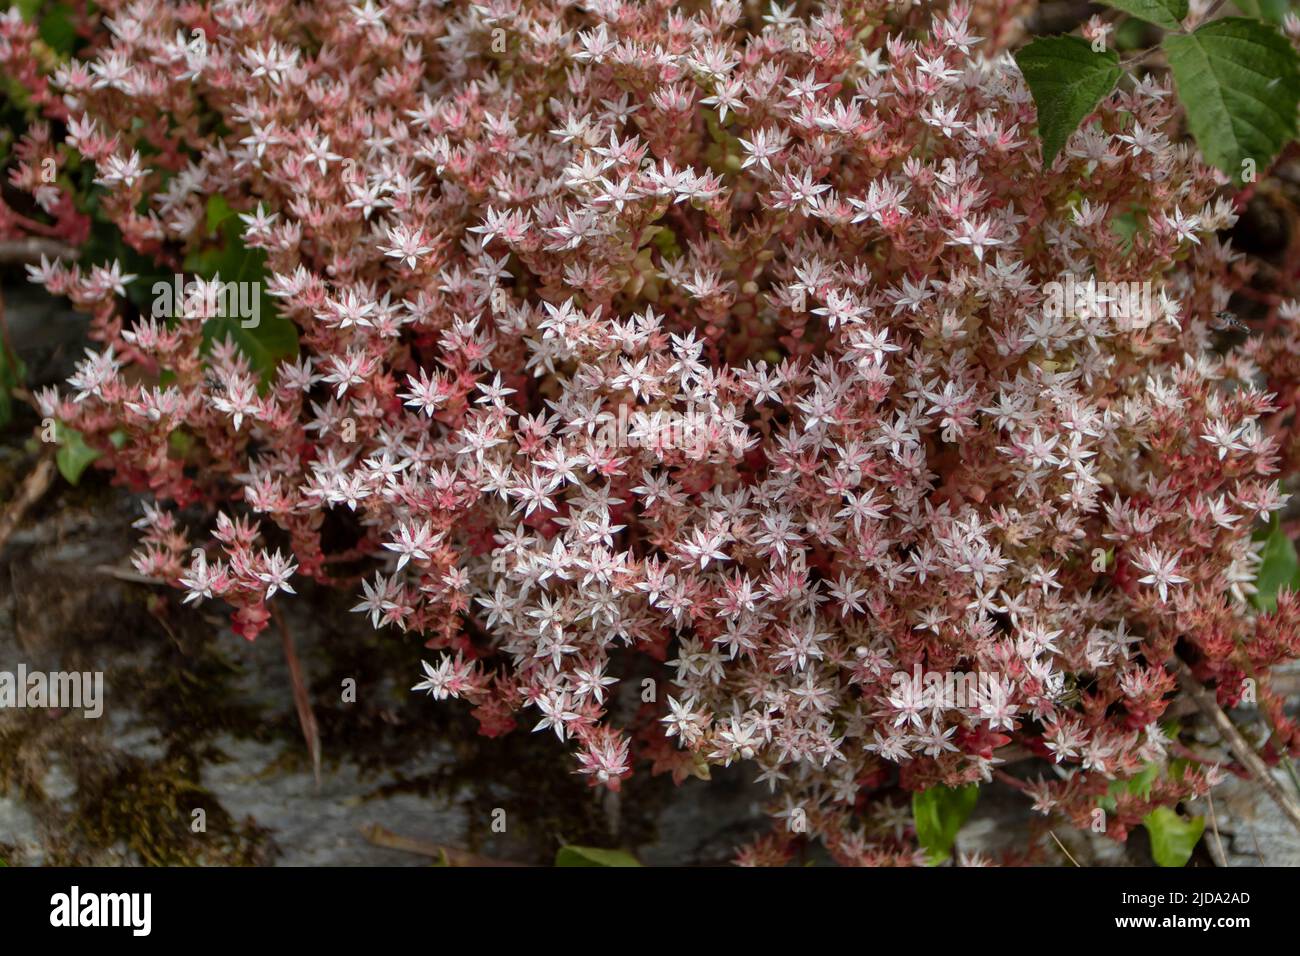 Sedum anglicum or english stonecrop Crassulaceae plant covered with star-like white and pink flowers on the rock near Luarca,Asturias,Spain. Stock Photo